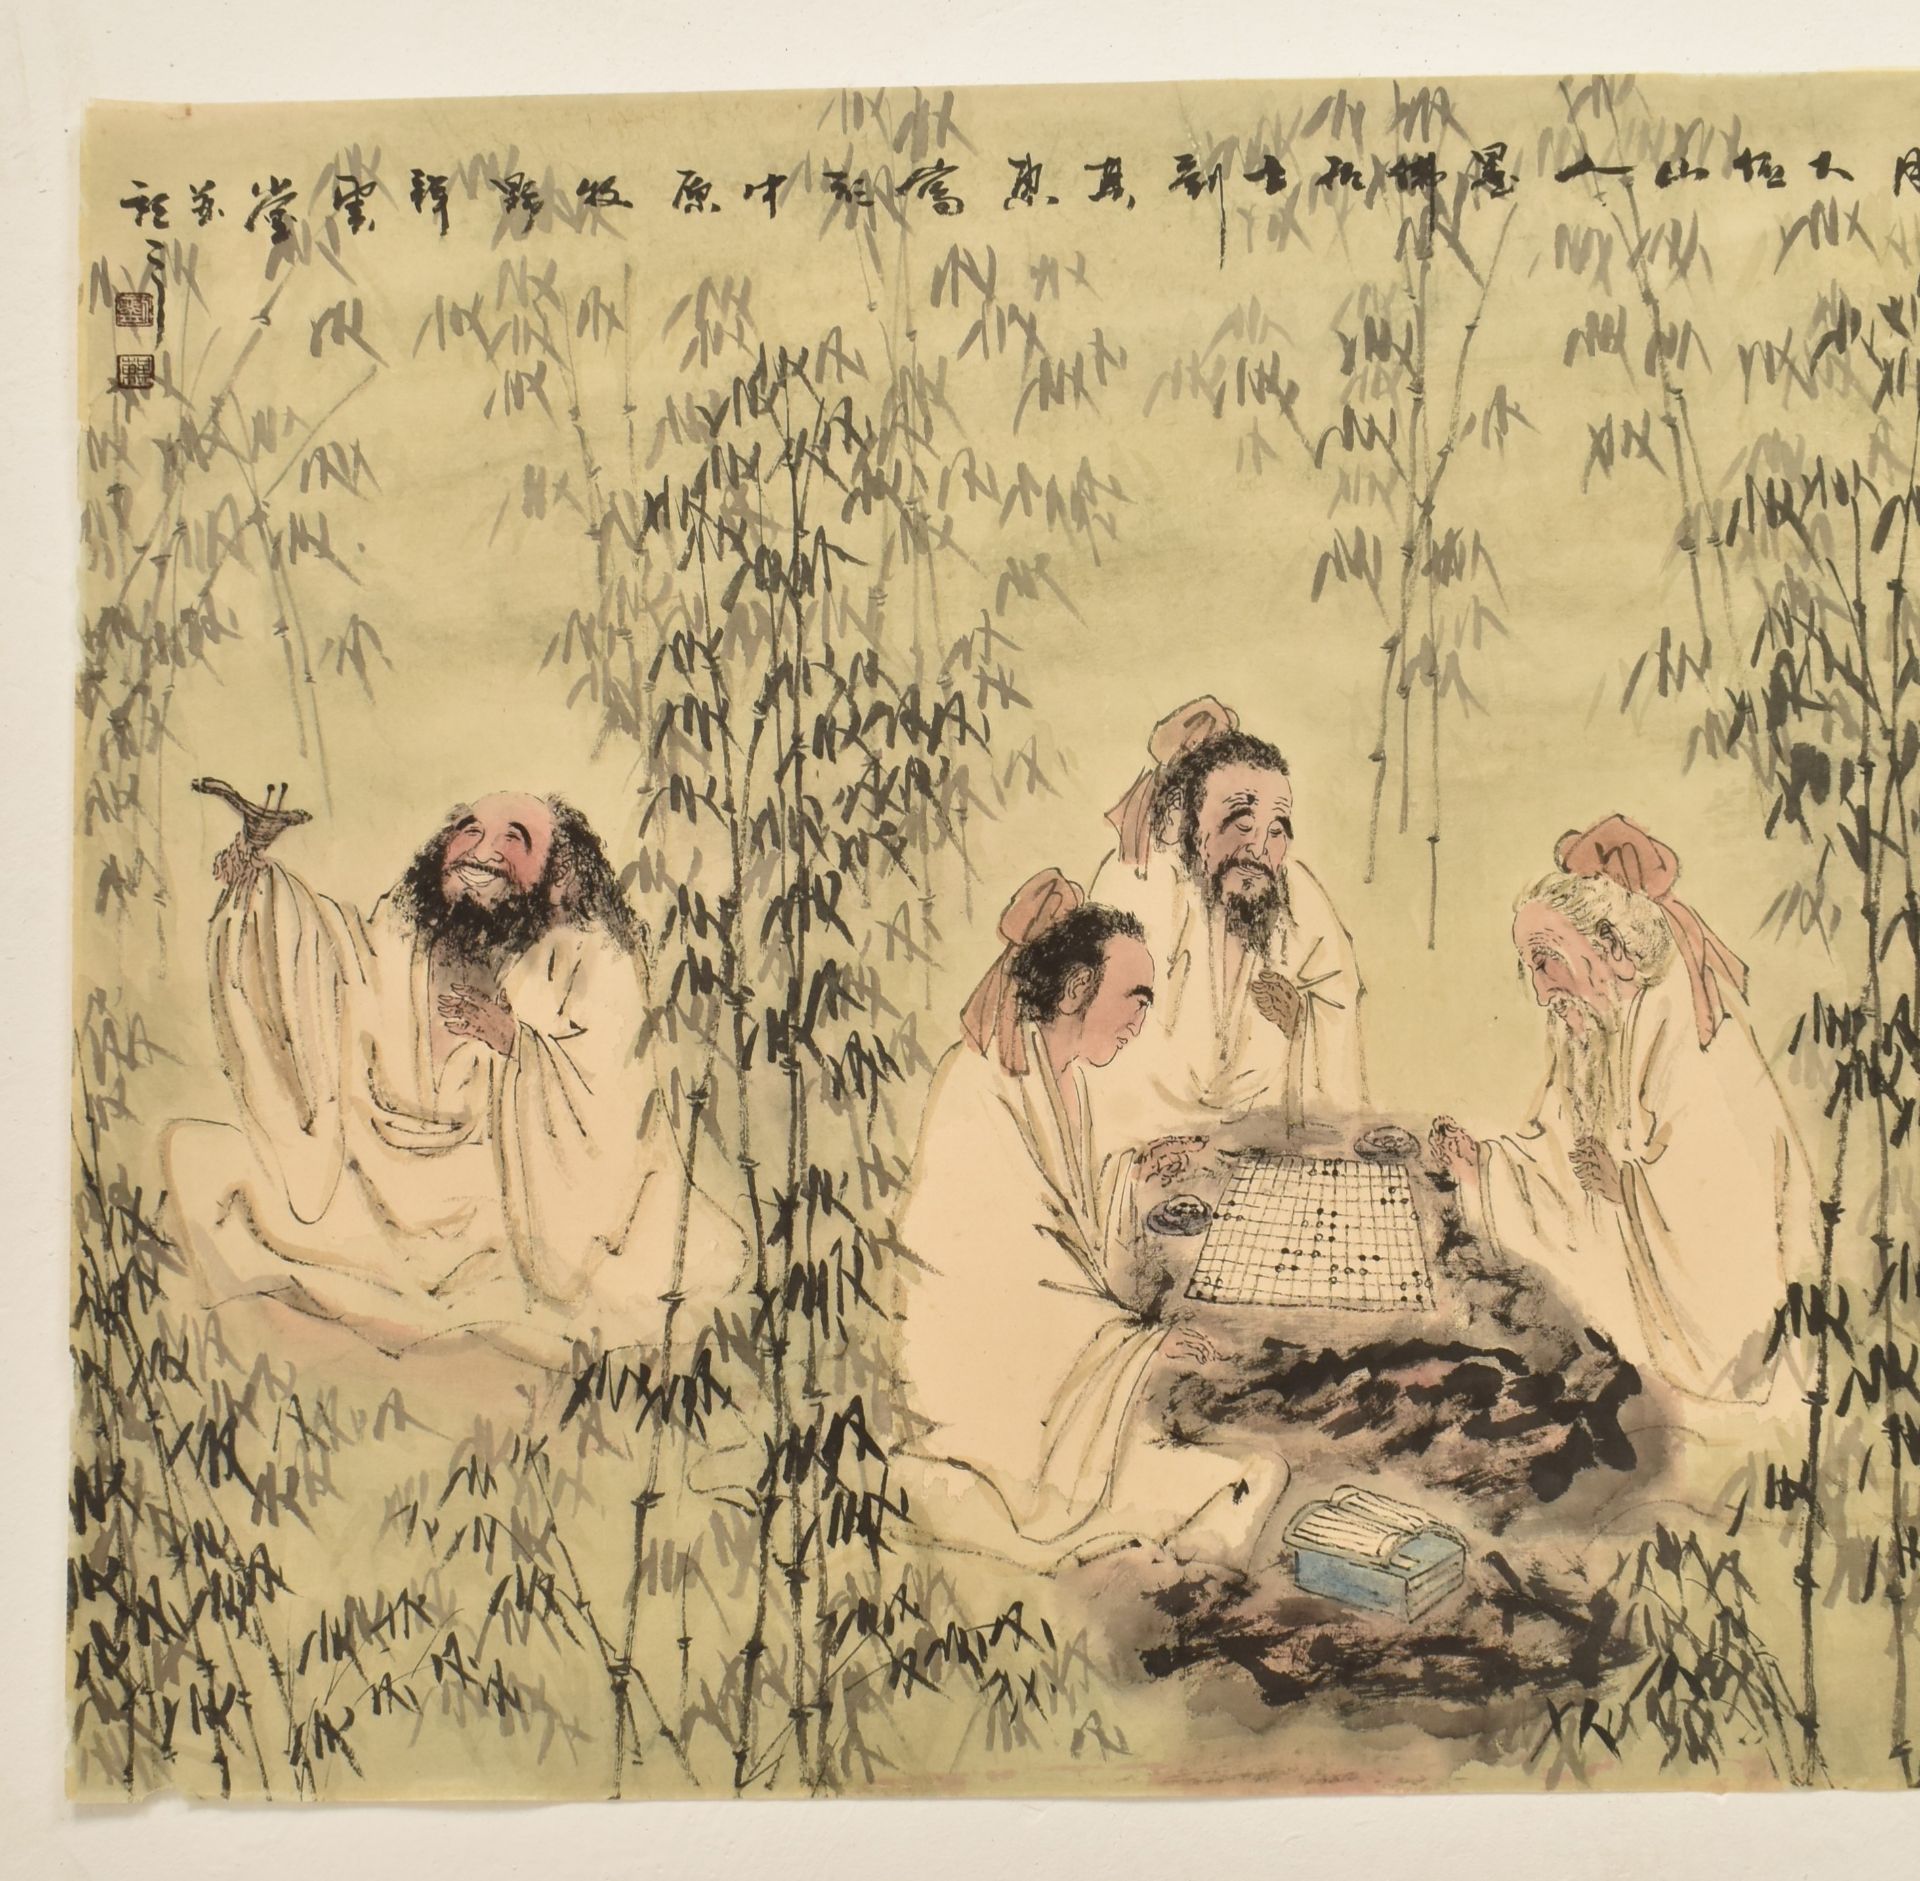 Liu Qidonf 刘其东 - THE SEVEN AGES OF THE BAMBOO GROVE 竹林七賢 - Image 3 of 6